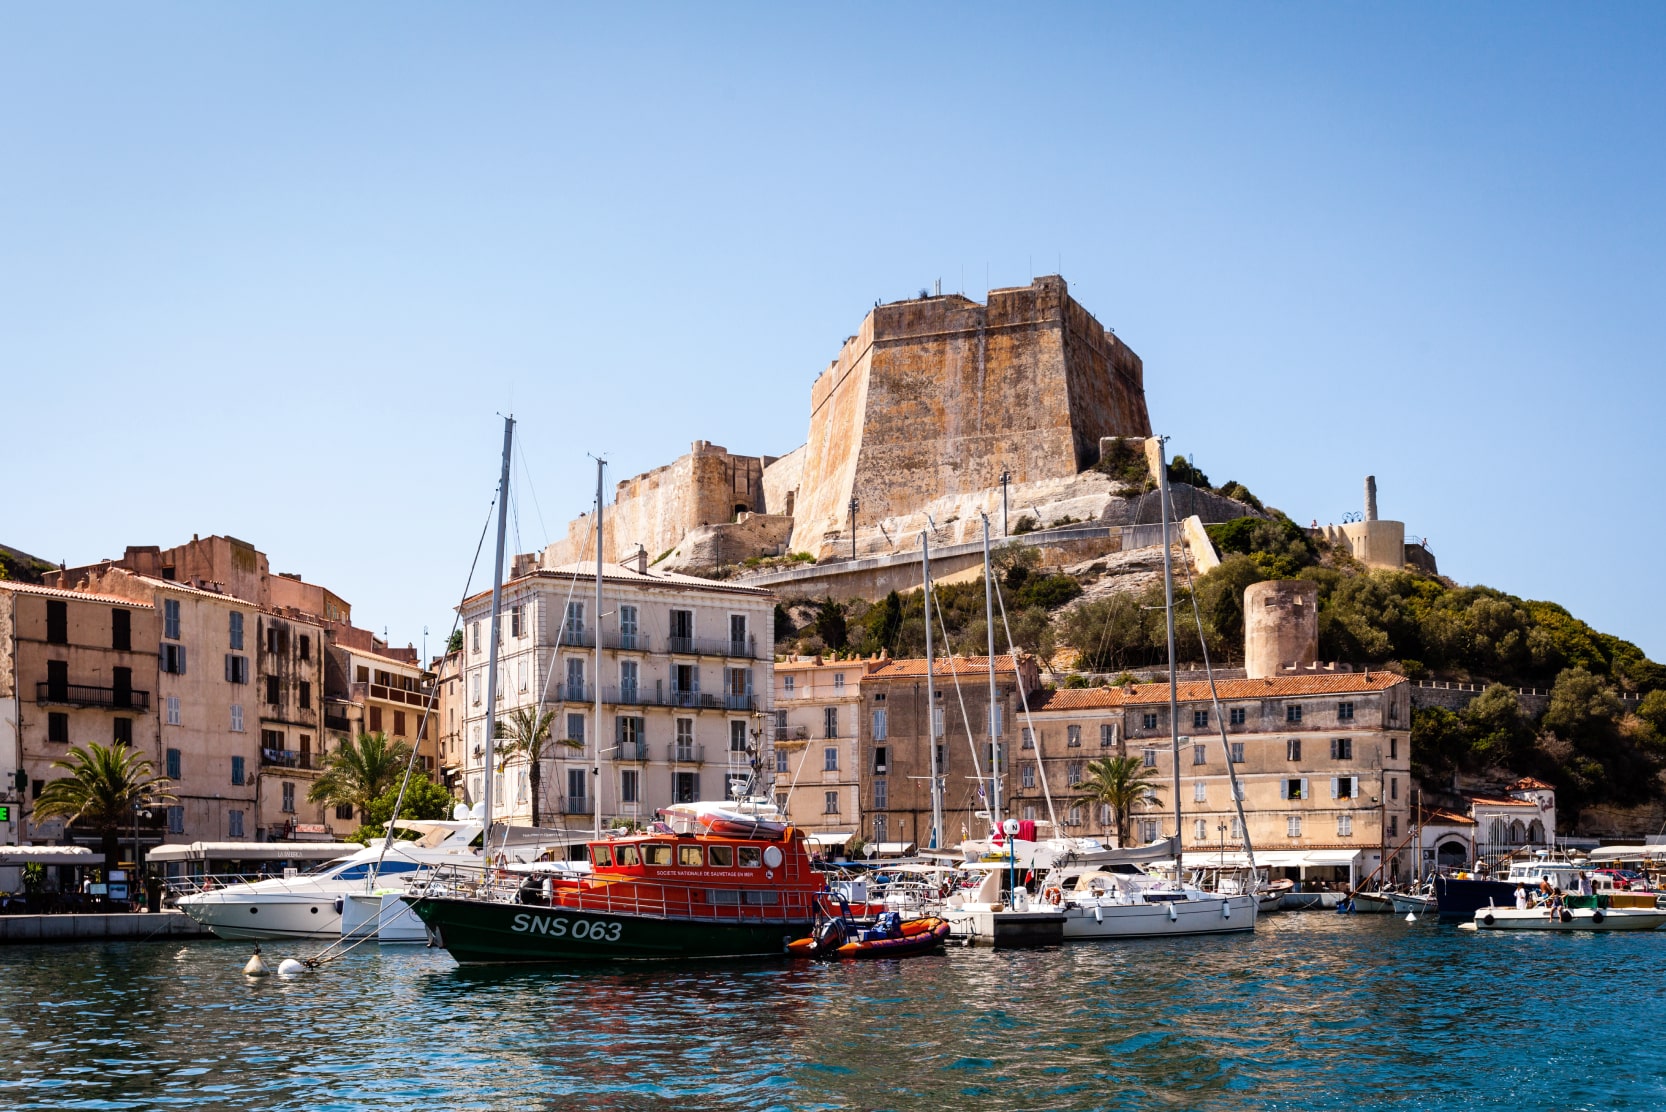 most-beautiful-towns-to-visit-in-corsica-bonifacio-port-boats-houses-citadelle